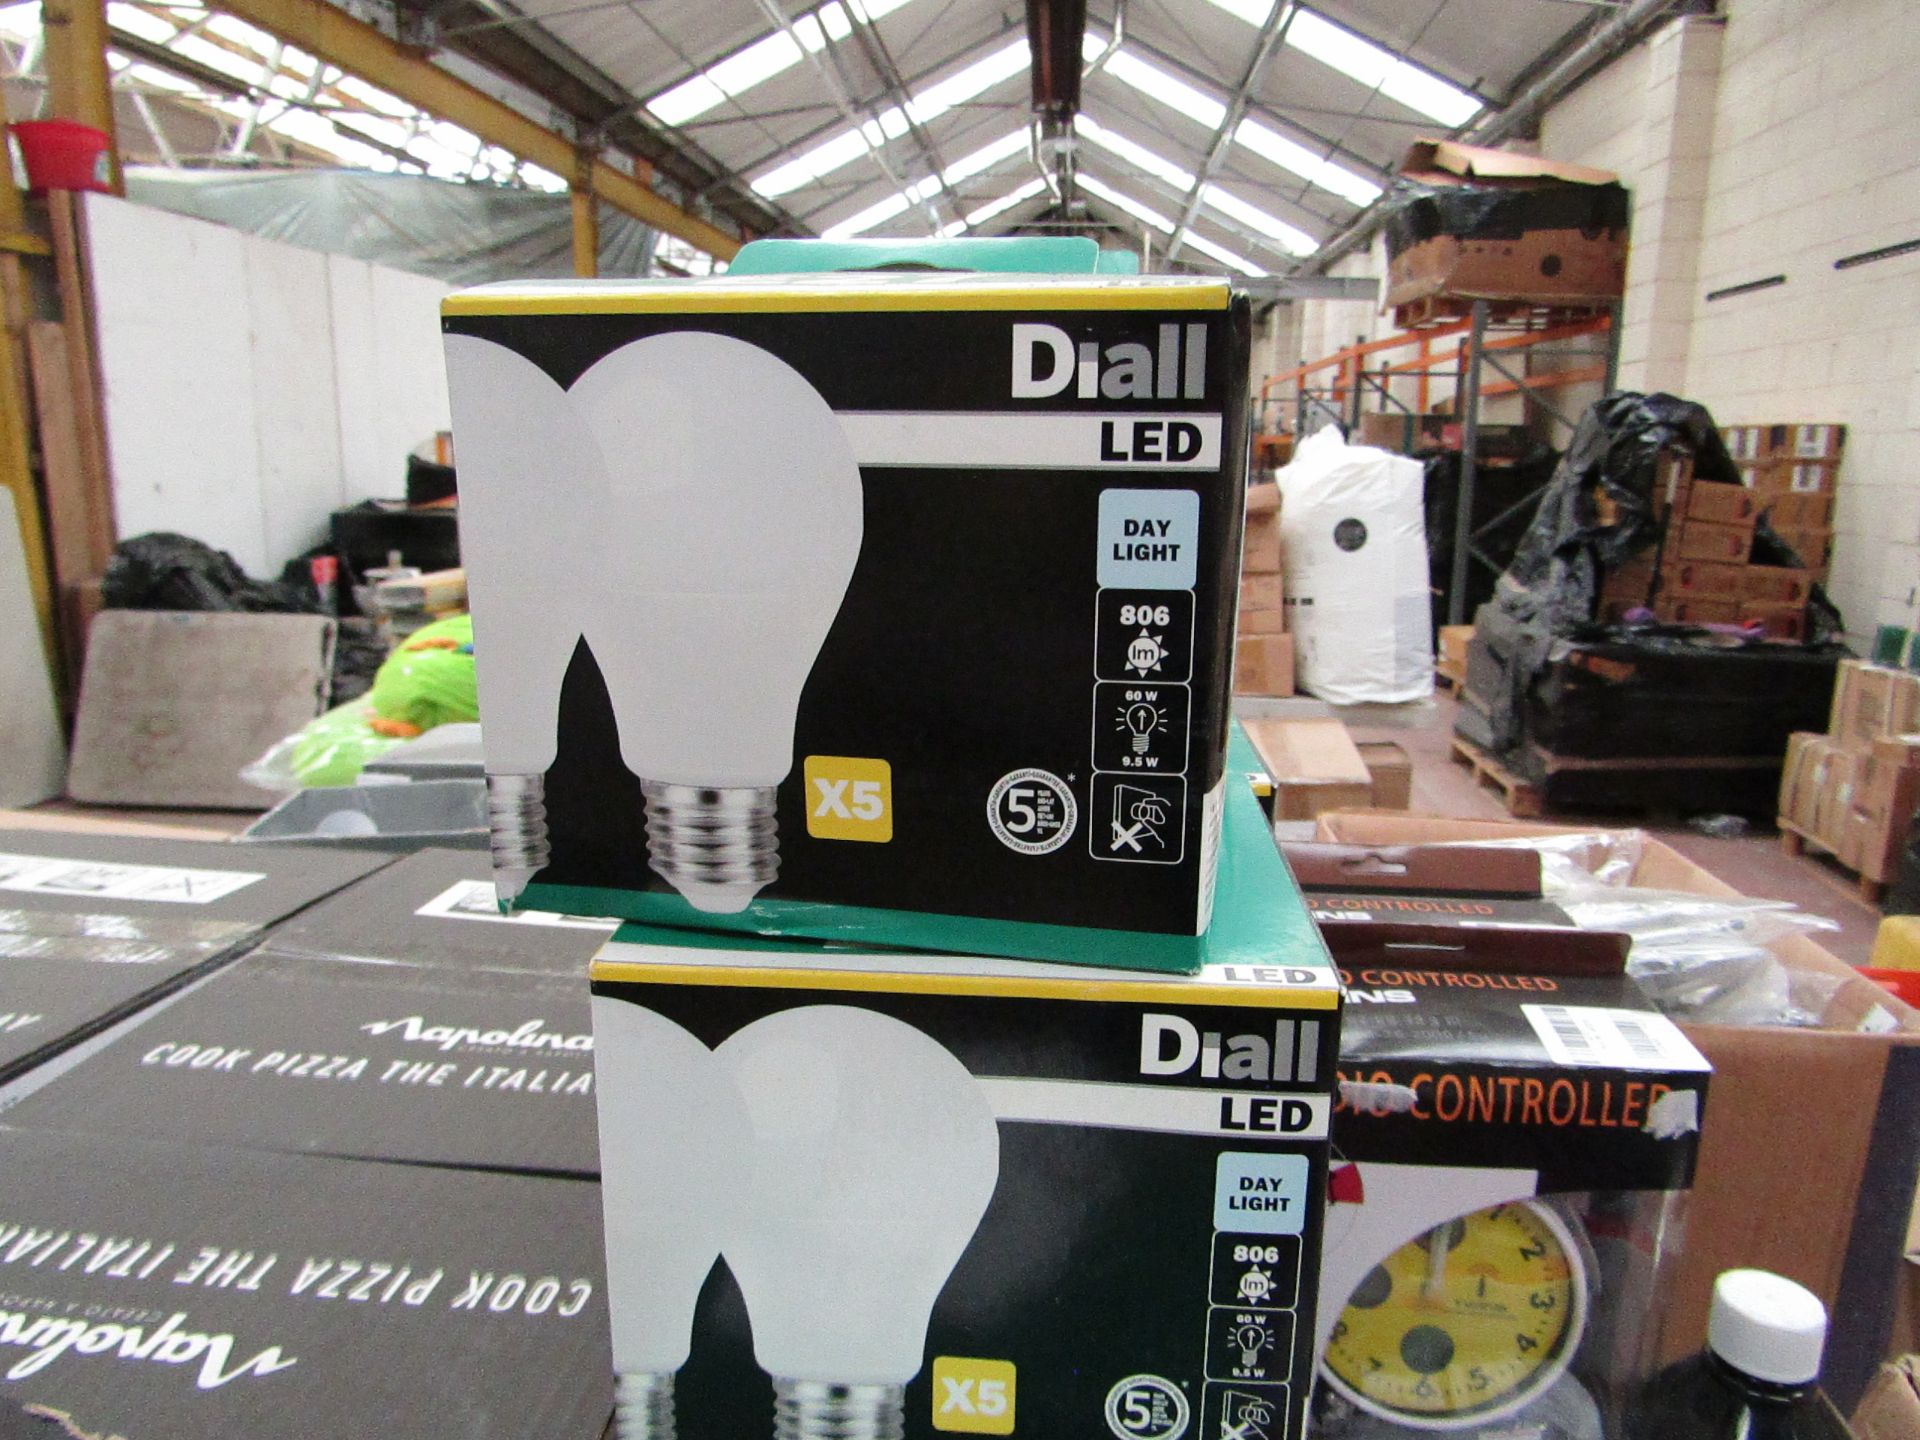 5x Diall - E27 LED Daylight Light Bulbs ( 5 Pack ) 806 Lumens - Unchecked & Boxed.